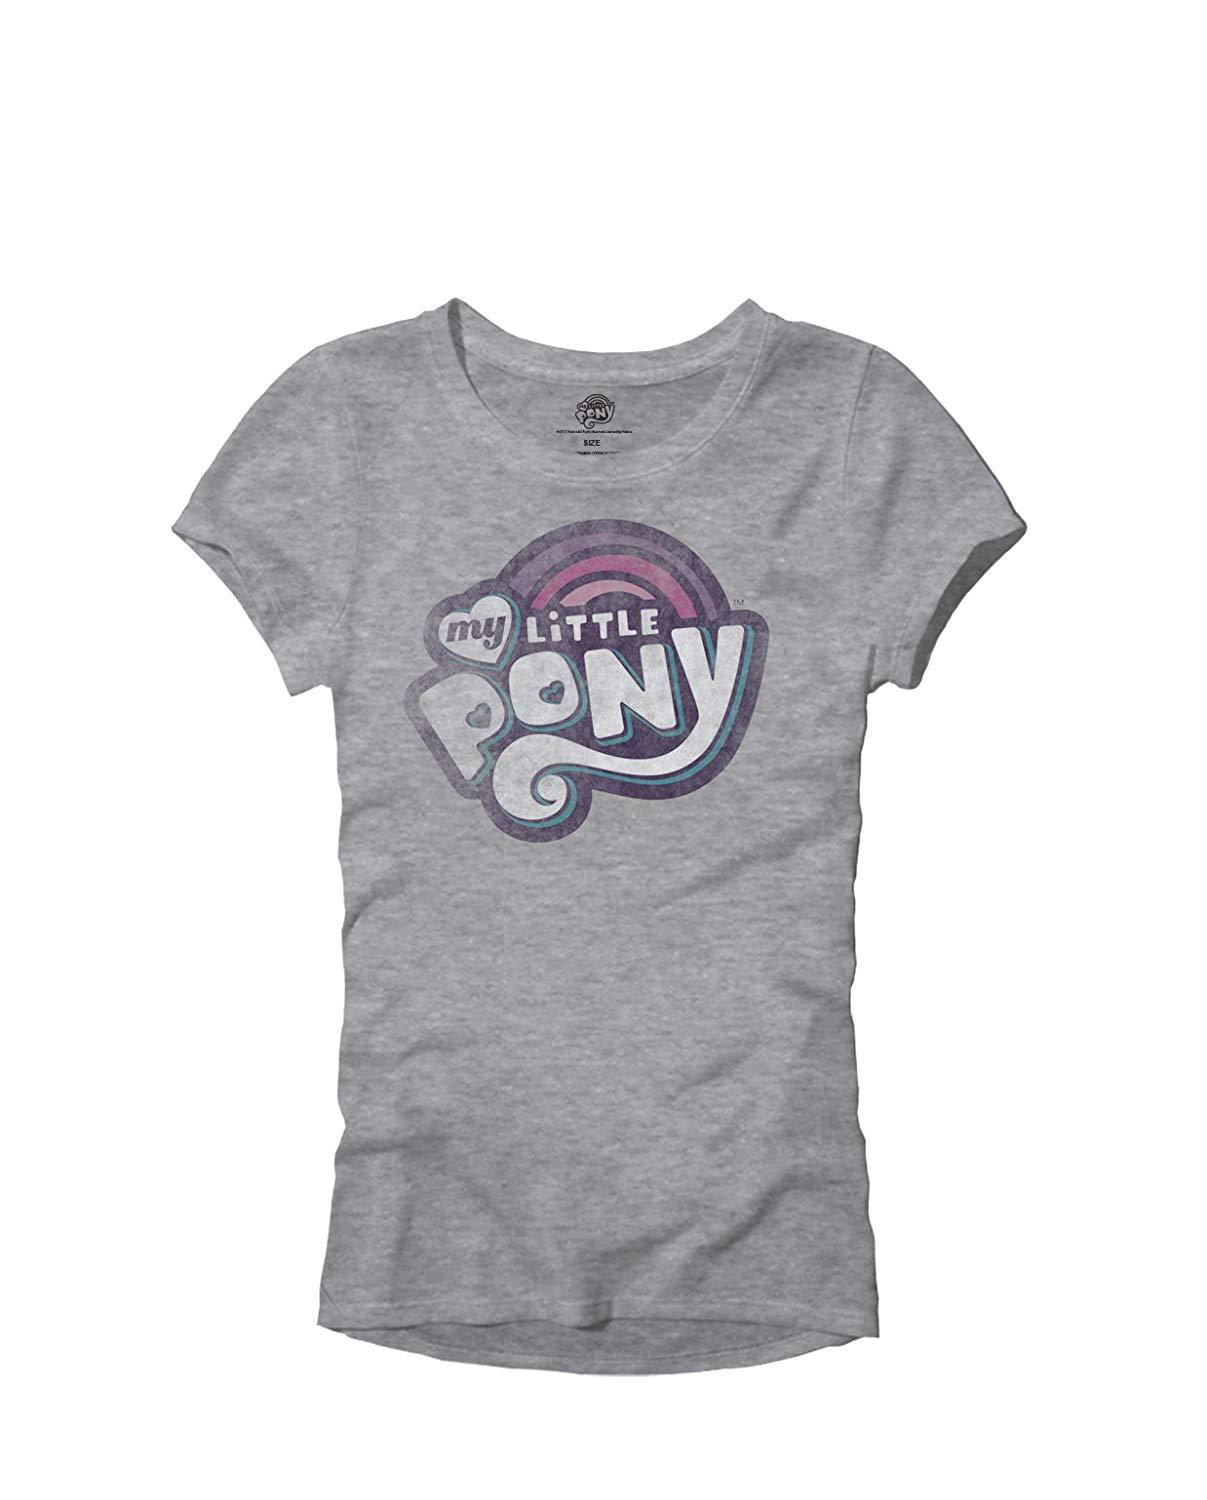 Details about   Hasbro Little Pony Rainbow Dash Brony Adult Women's Juniors Slim Fit Graphic Tee